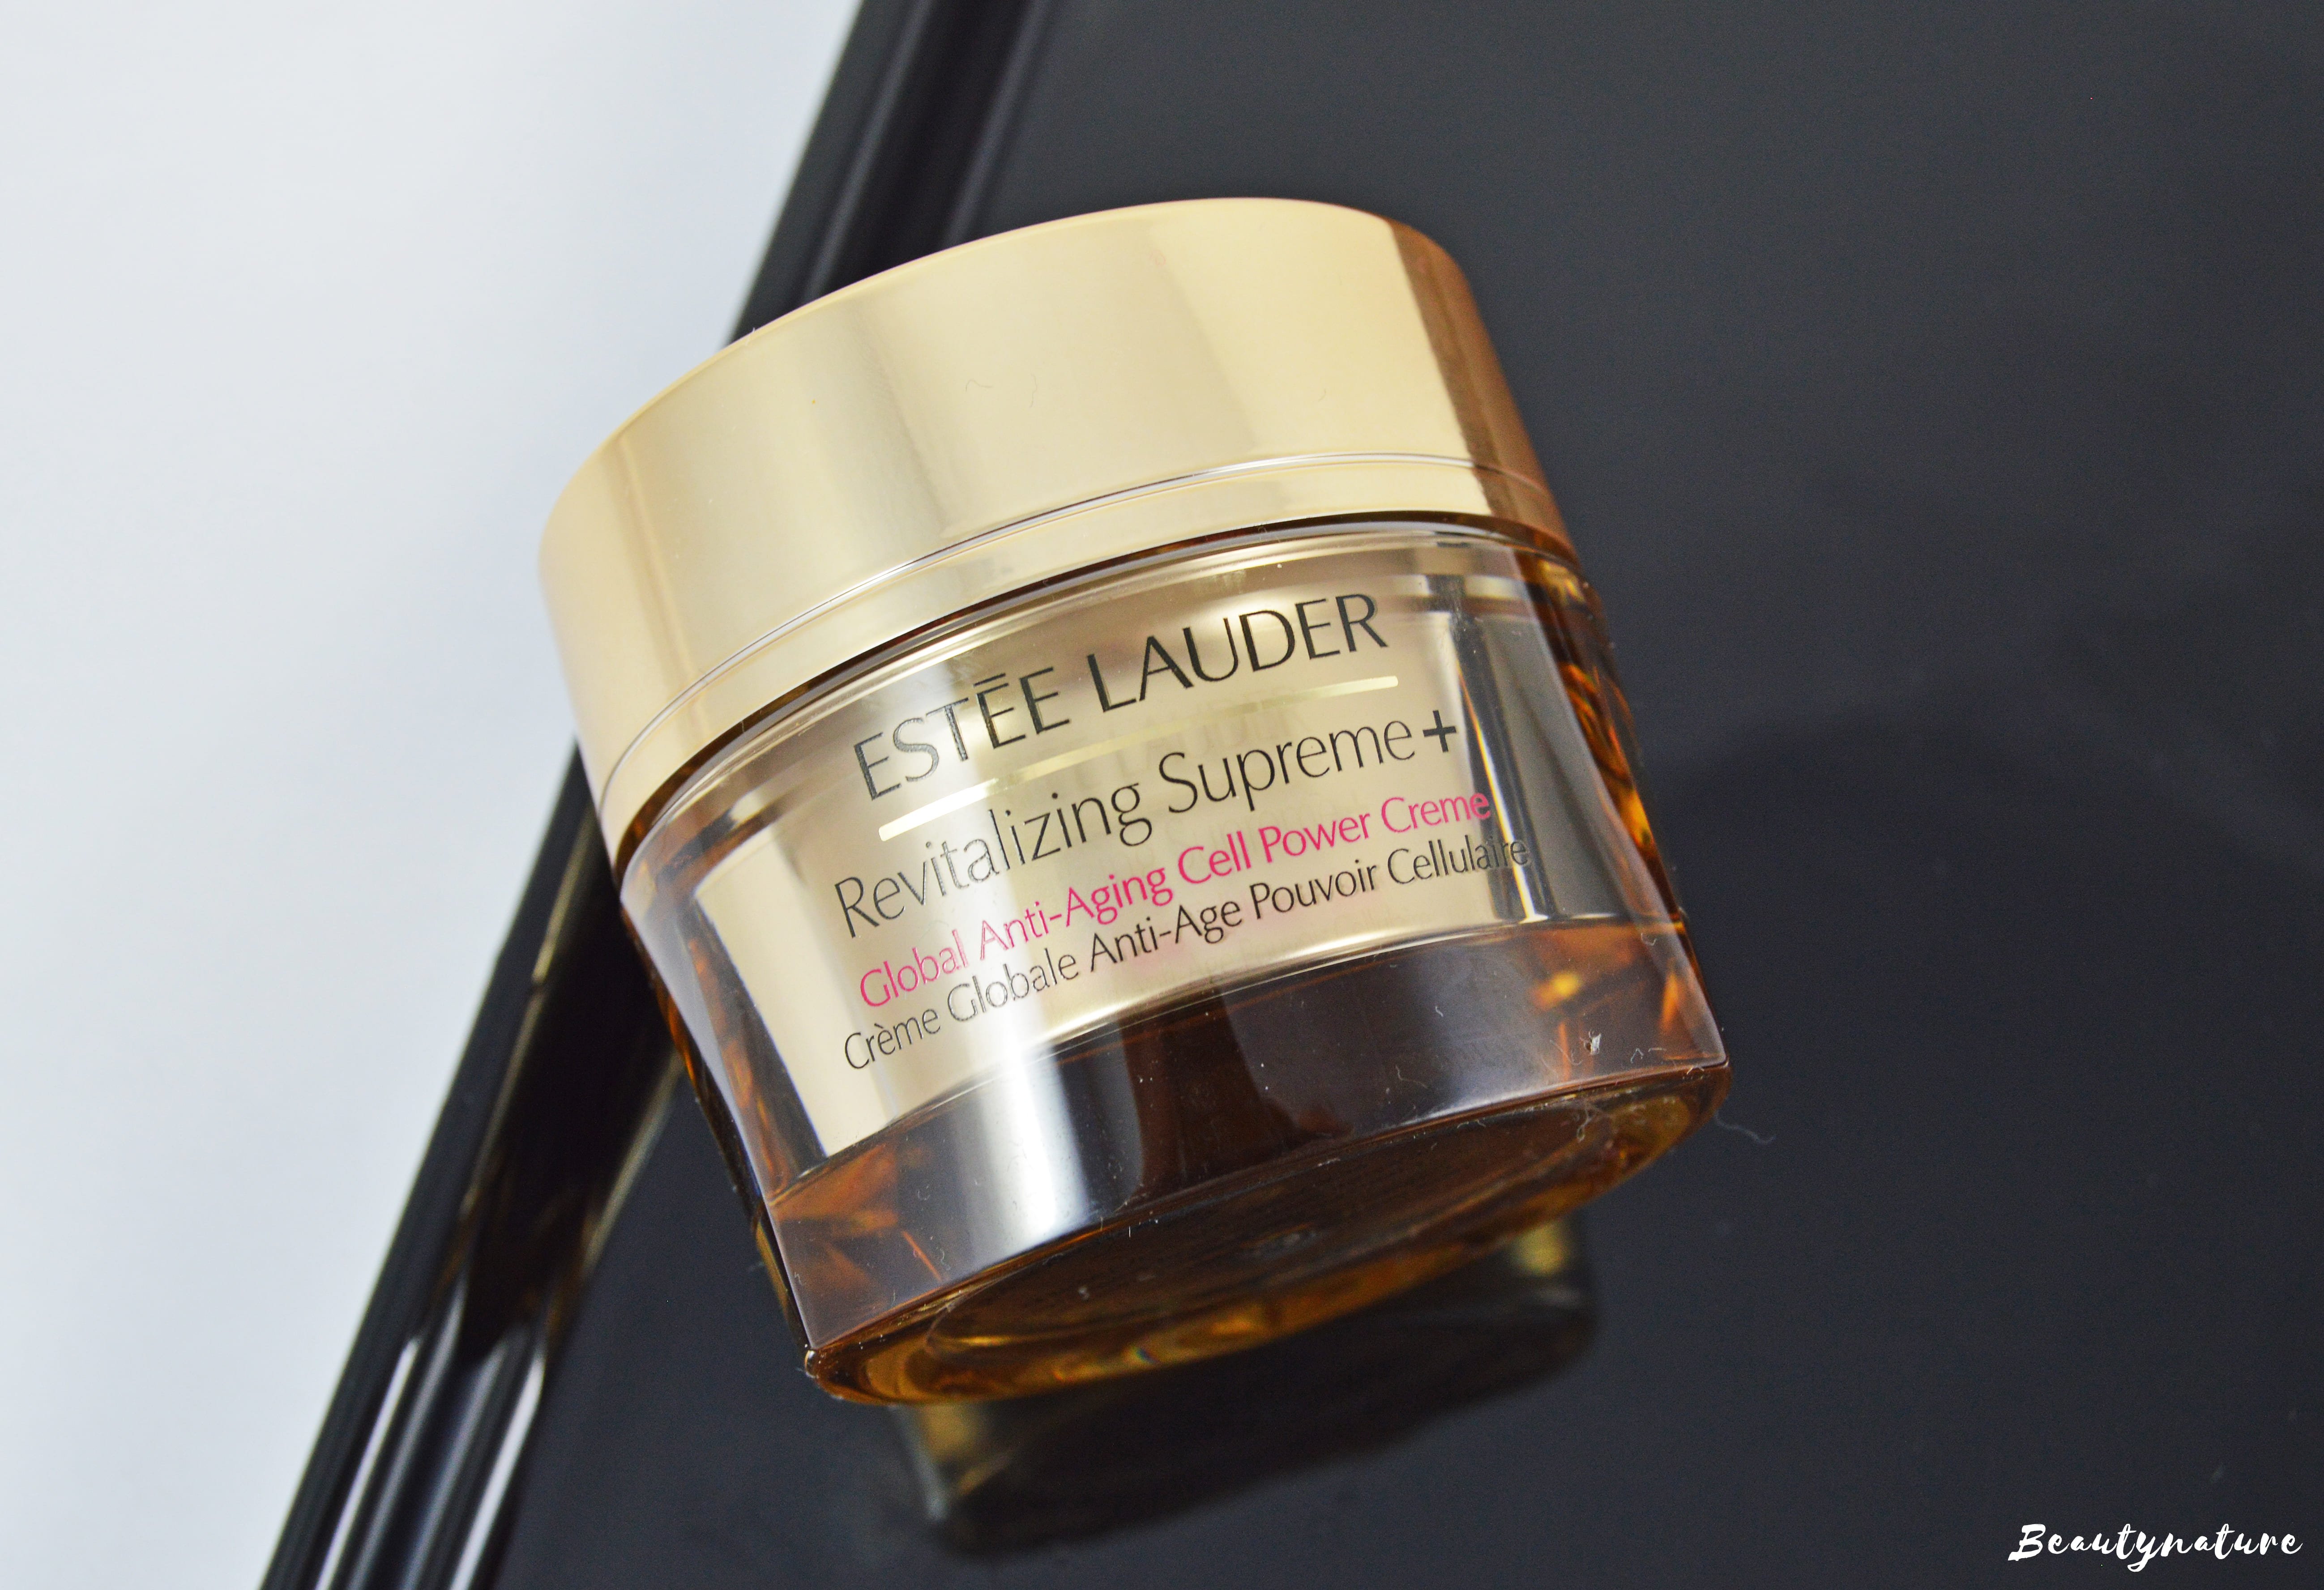 Revitalizing Supreme Plus Global Anti-Aging Cell Power Creme